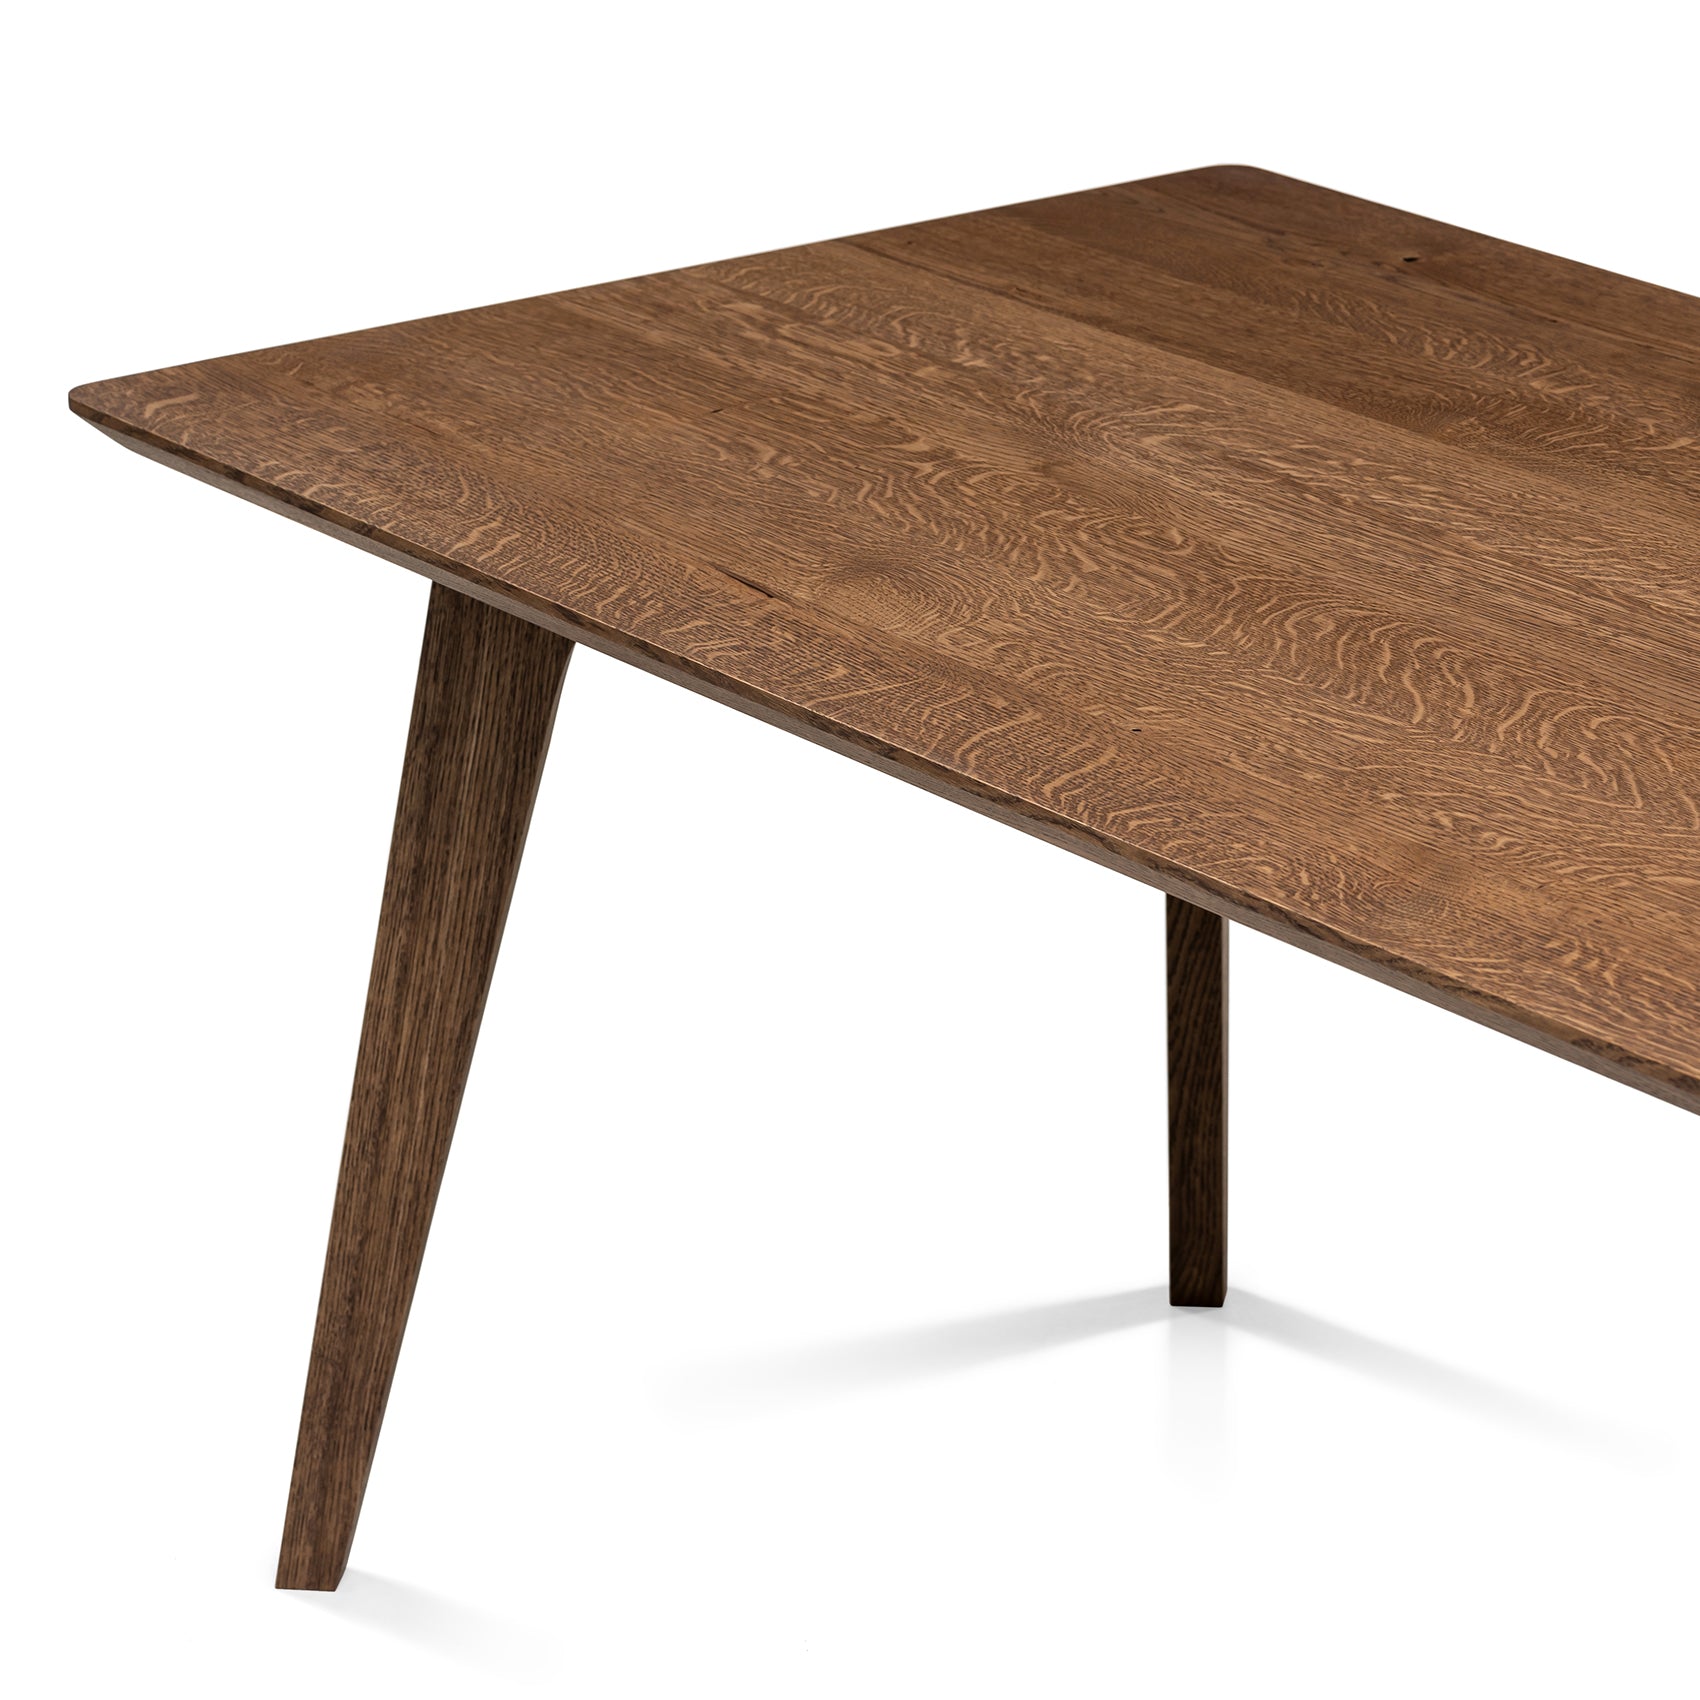 Aurora Extendable Oak Dining Table in Chocolate Oak by S10Home